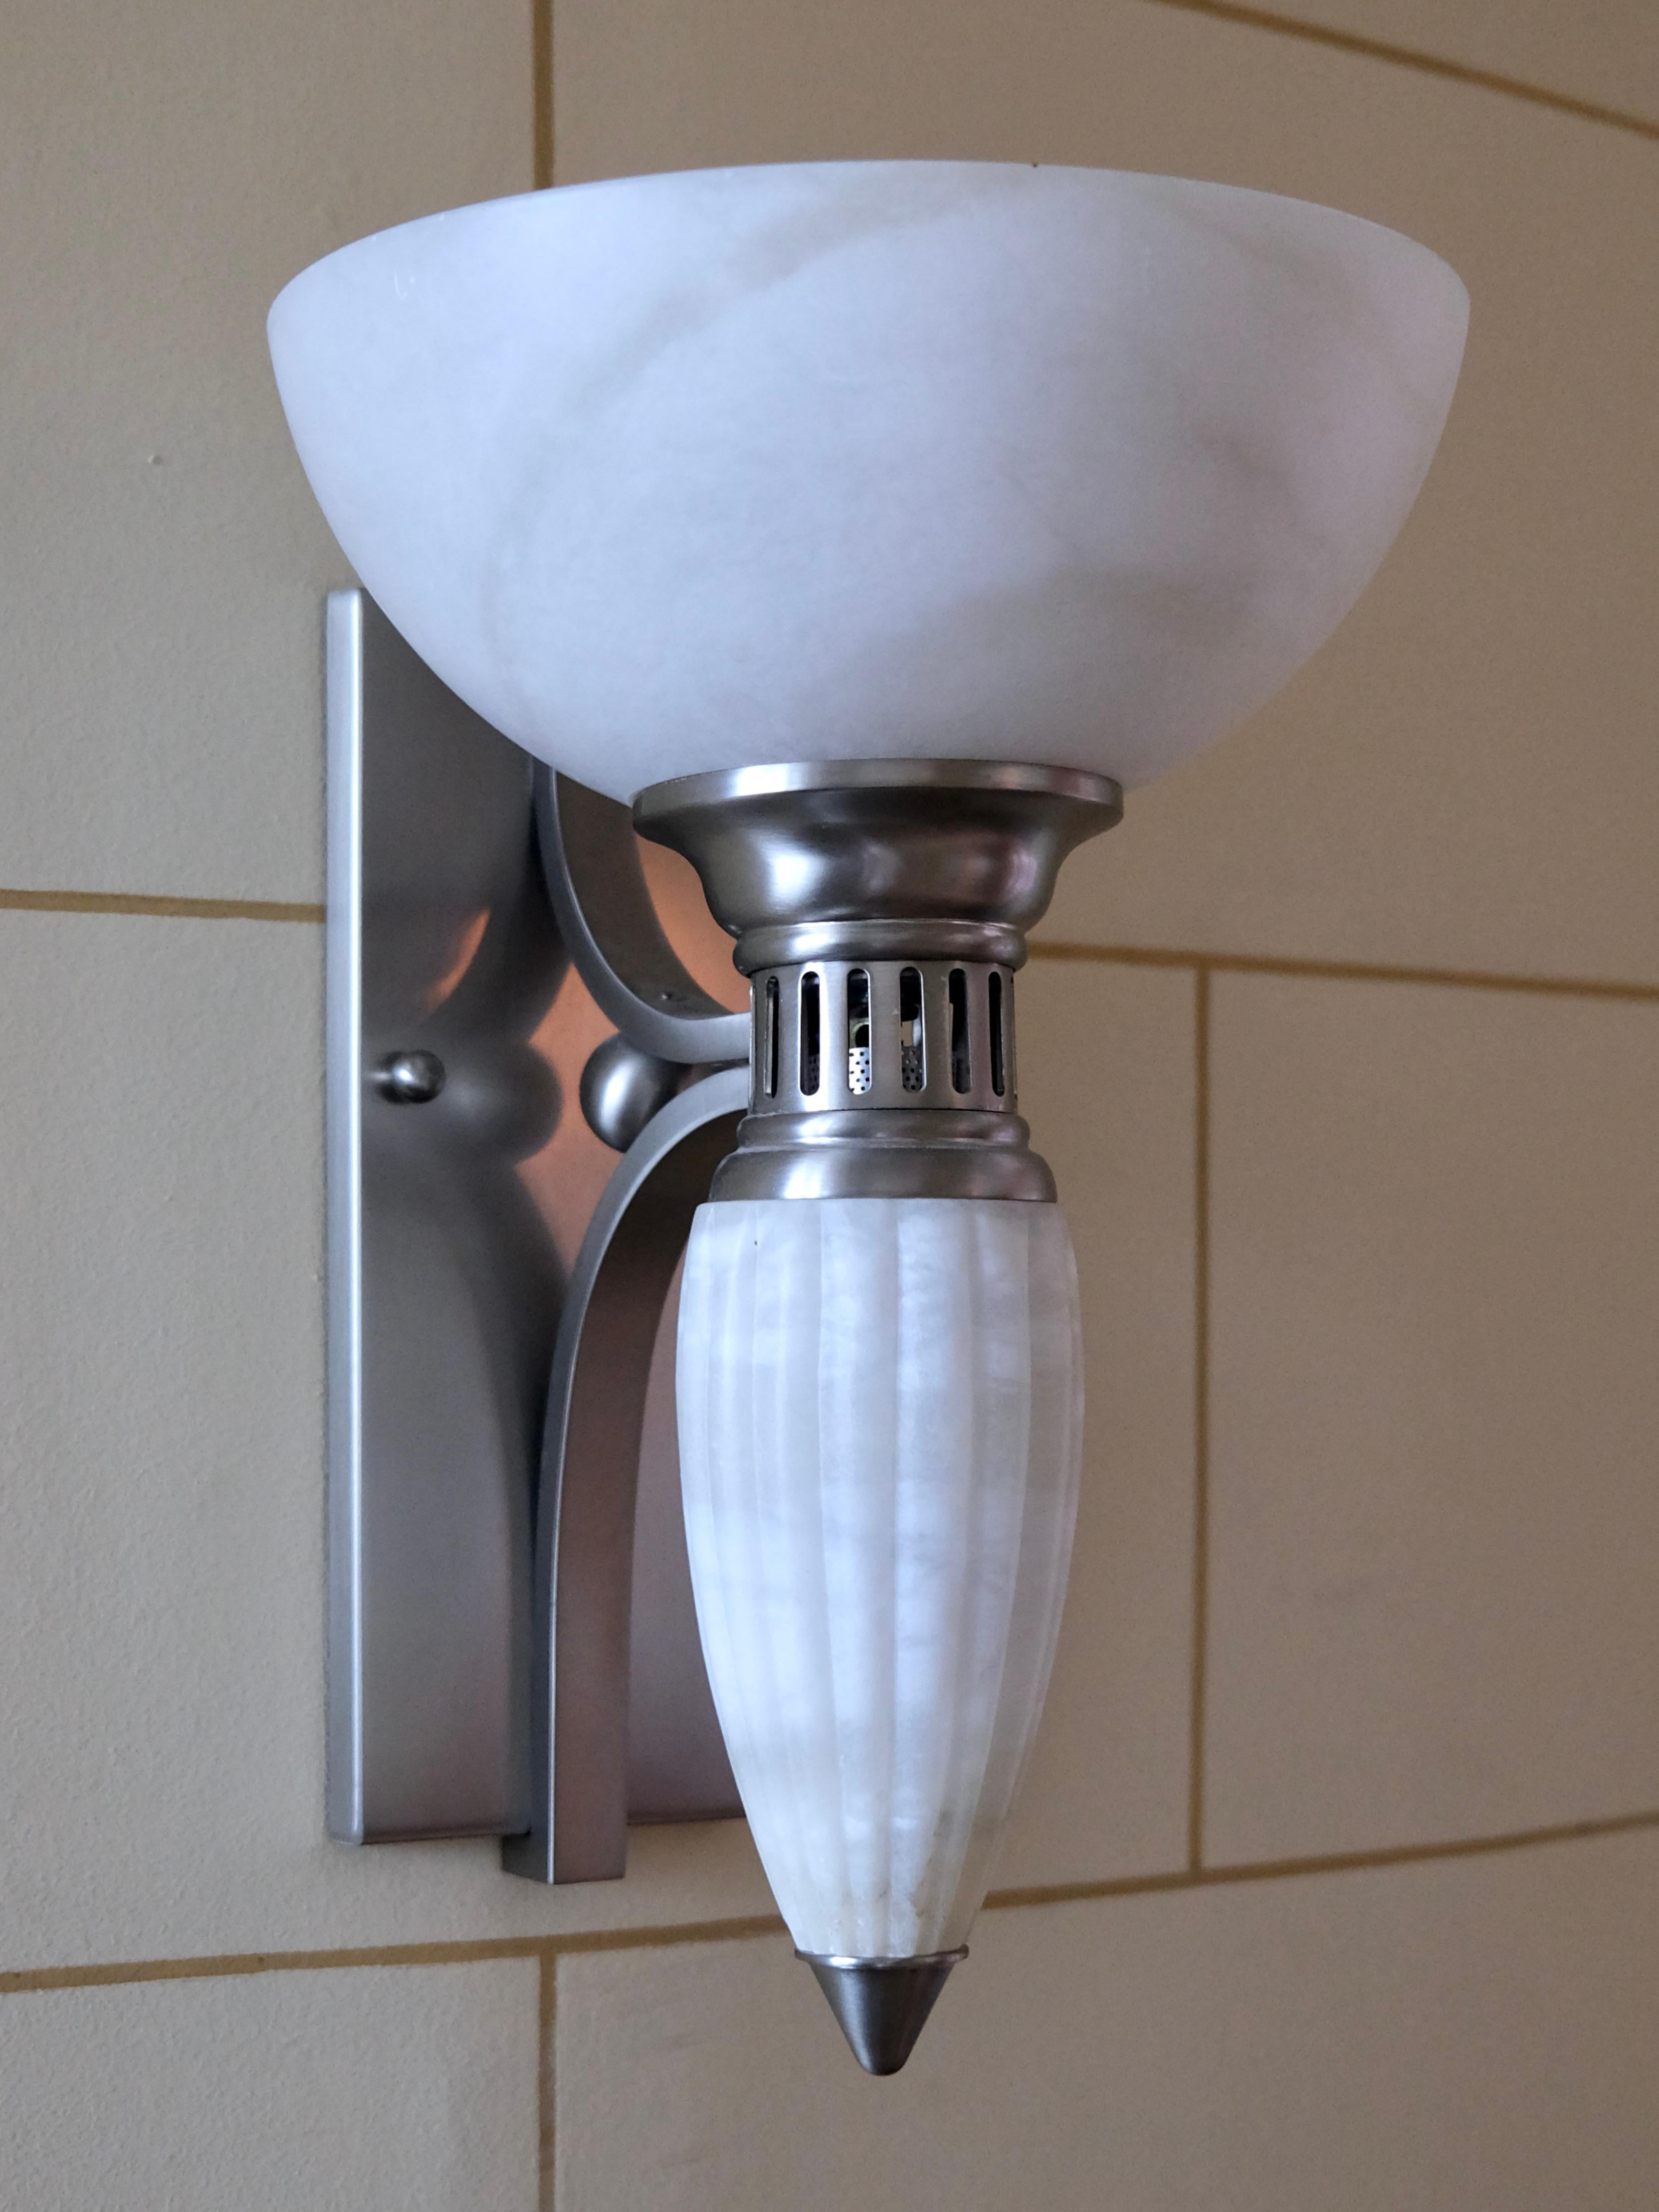 Set of 2 Art Deco Style Wall Sconces with Alabaster Bowls and Illuminated Cones For Sale 1